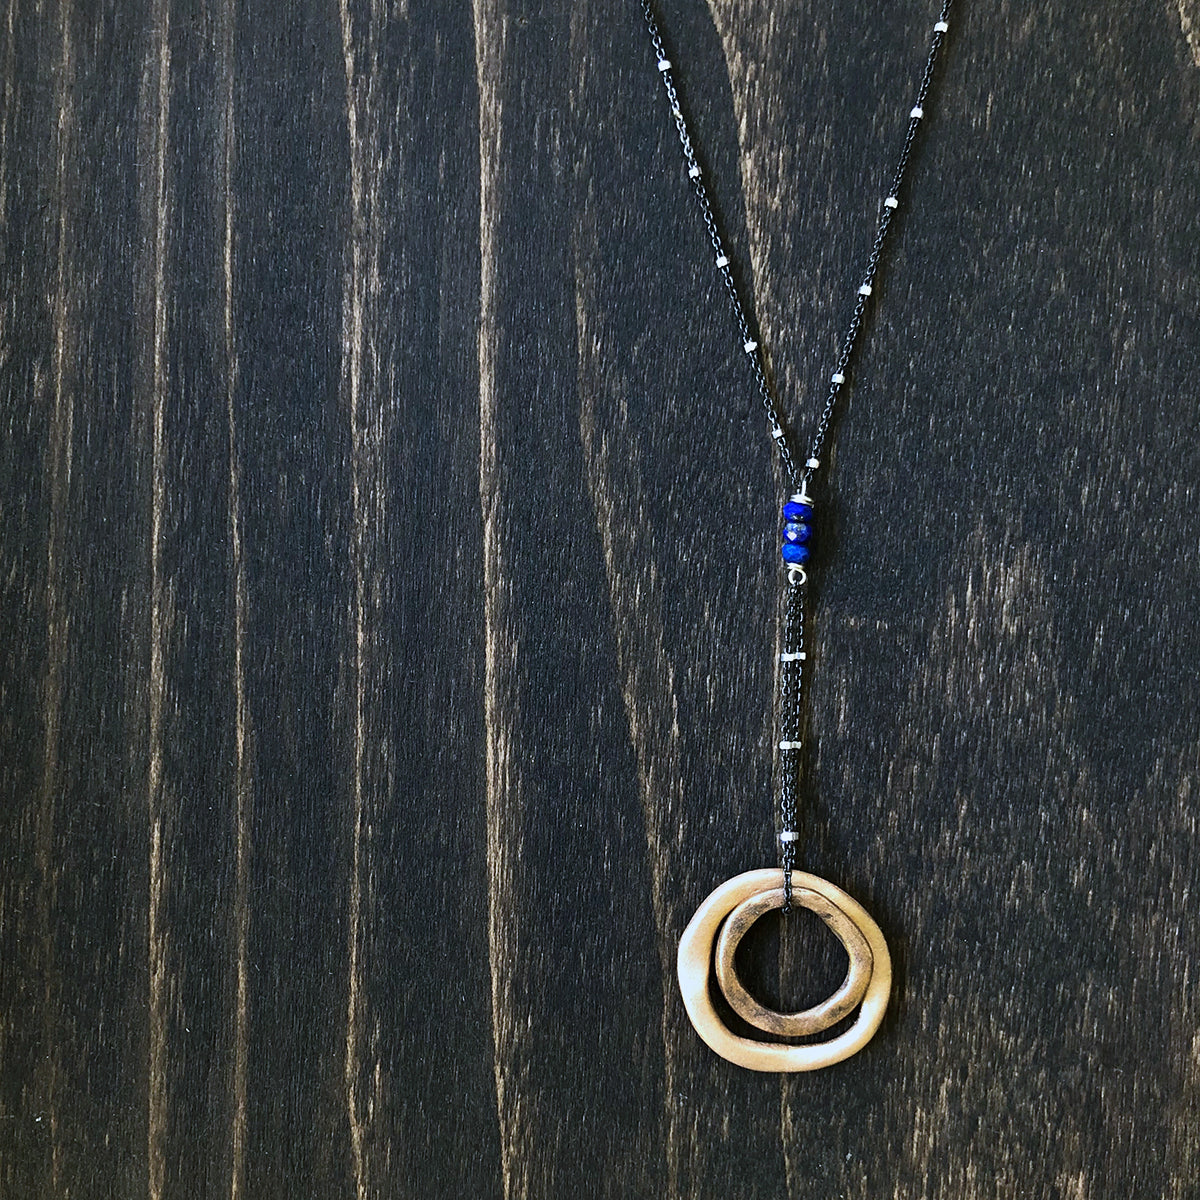 Bronze and Lapis Rings of Love Necklace - Jester Swink